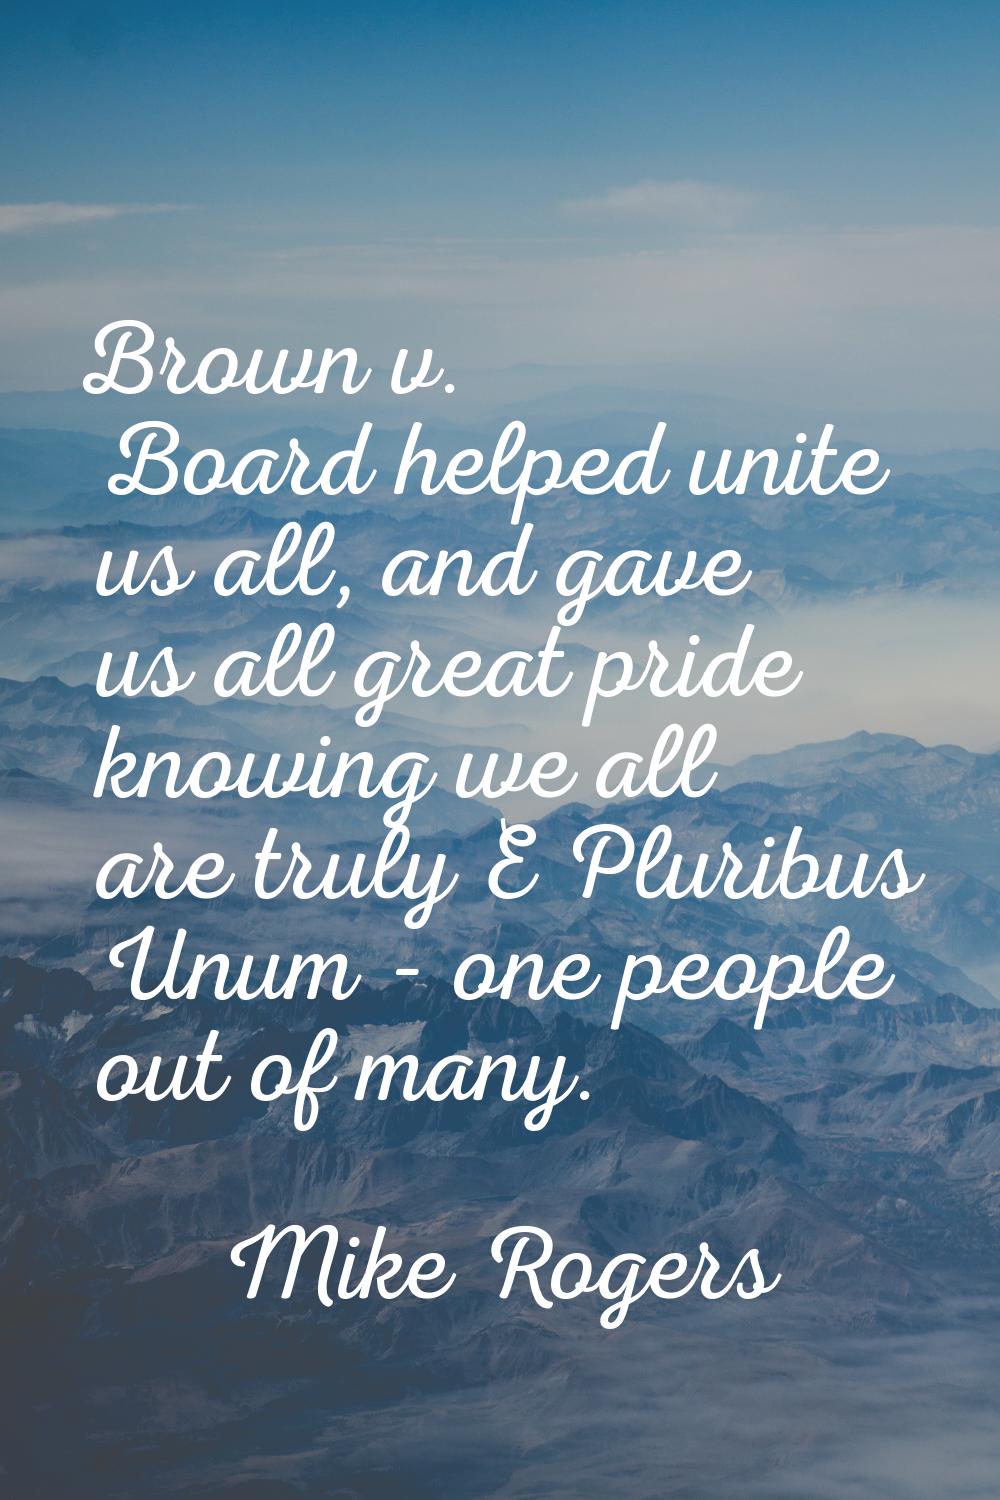 Brown v. Board helped unite us all, and gave us all great pride knowing we all are truly E Pluribus